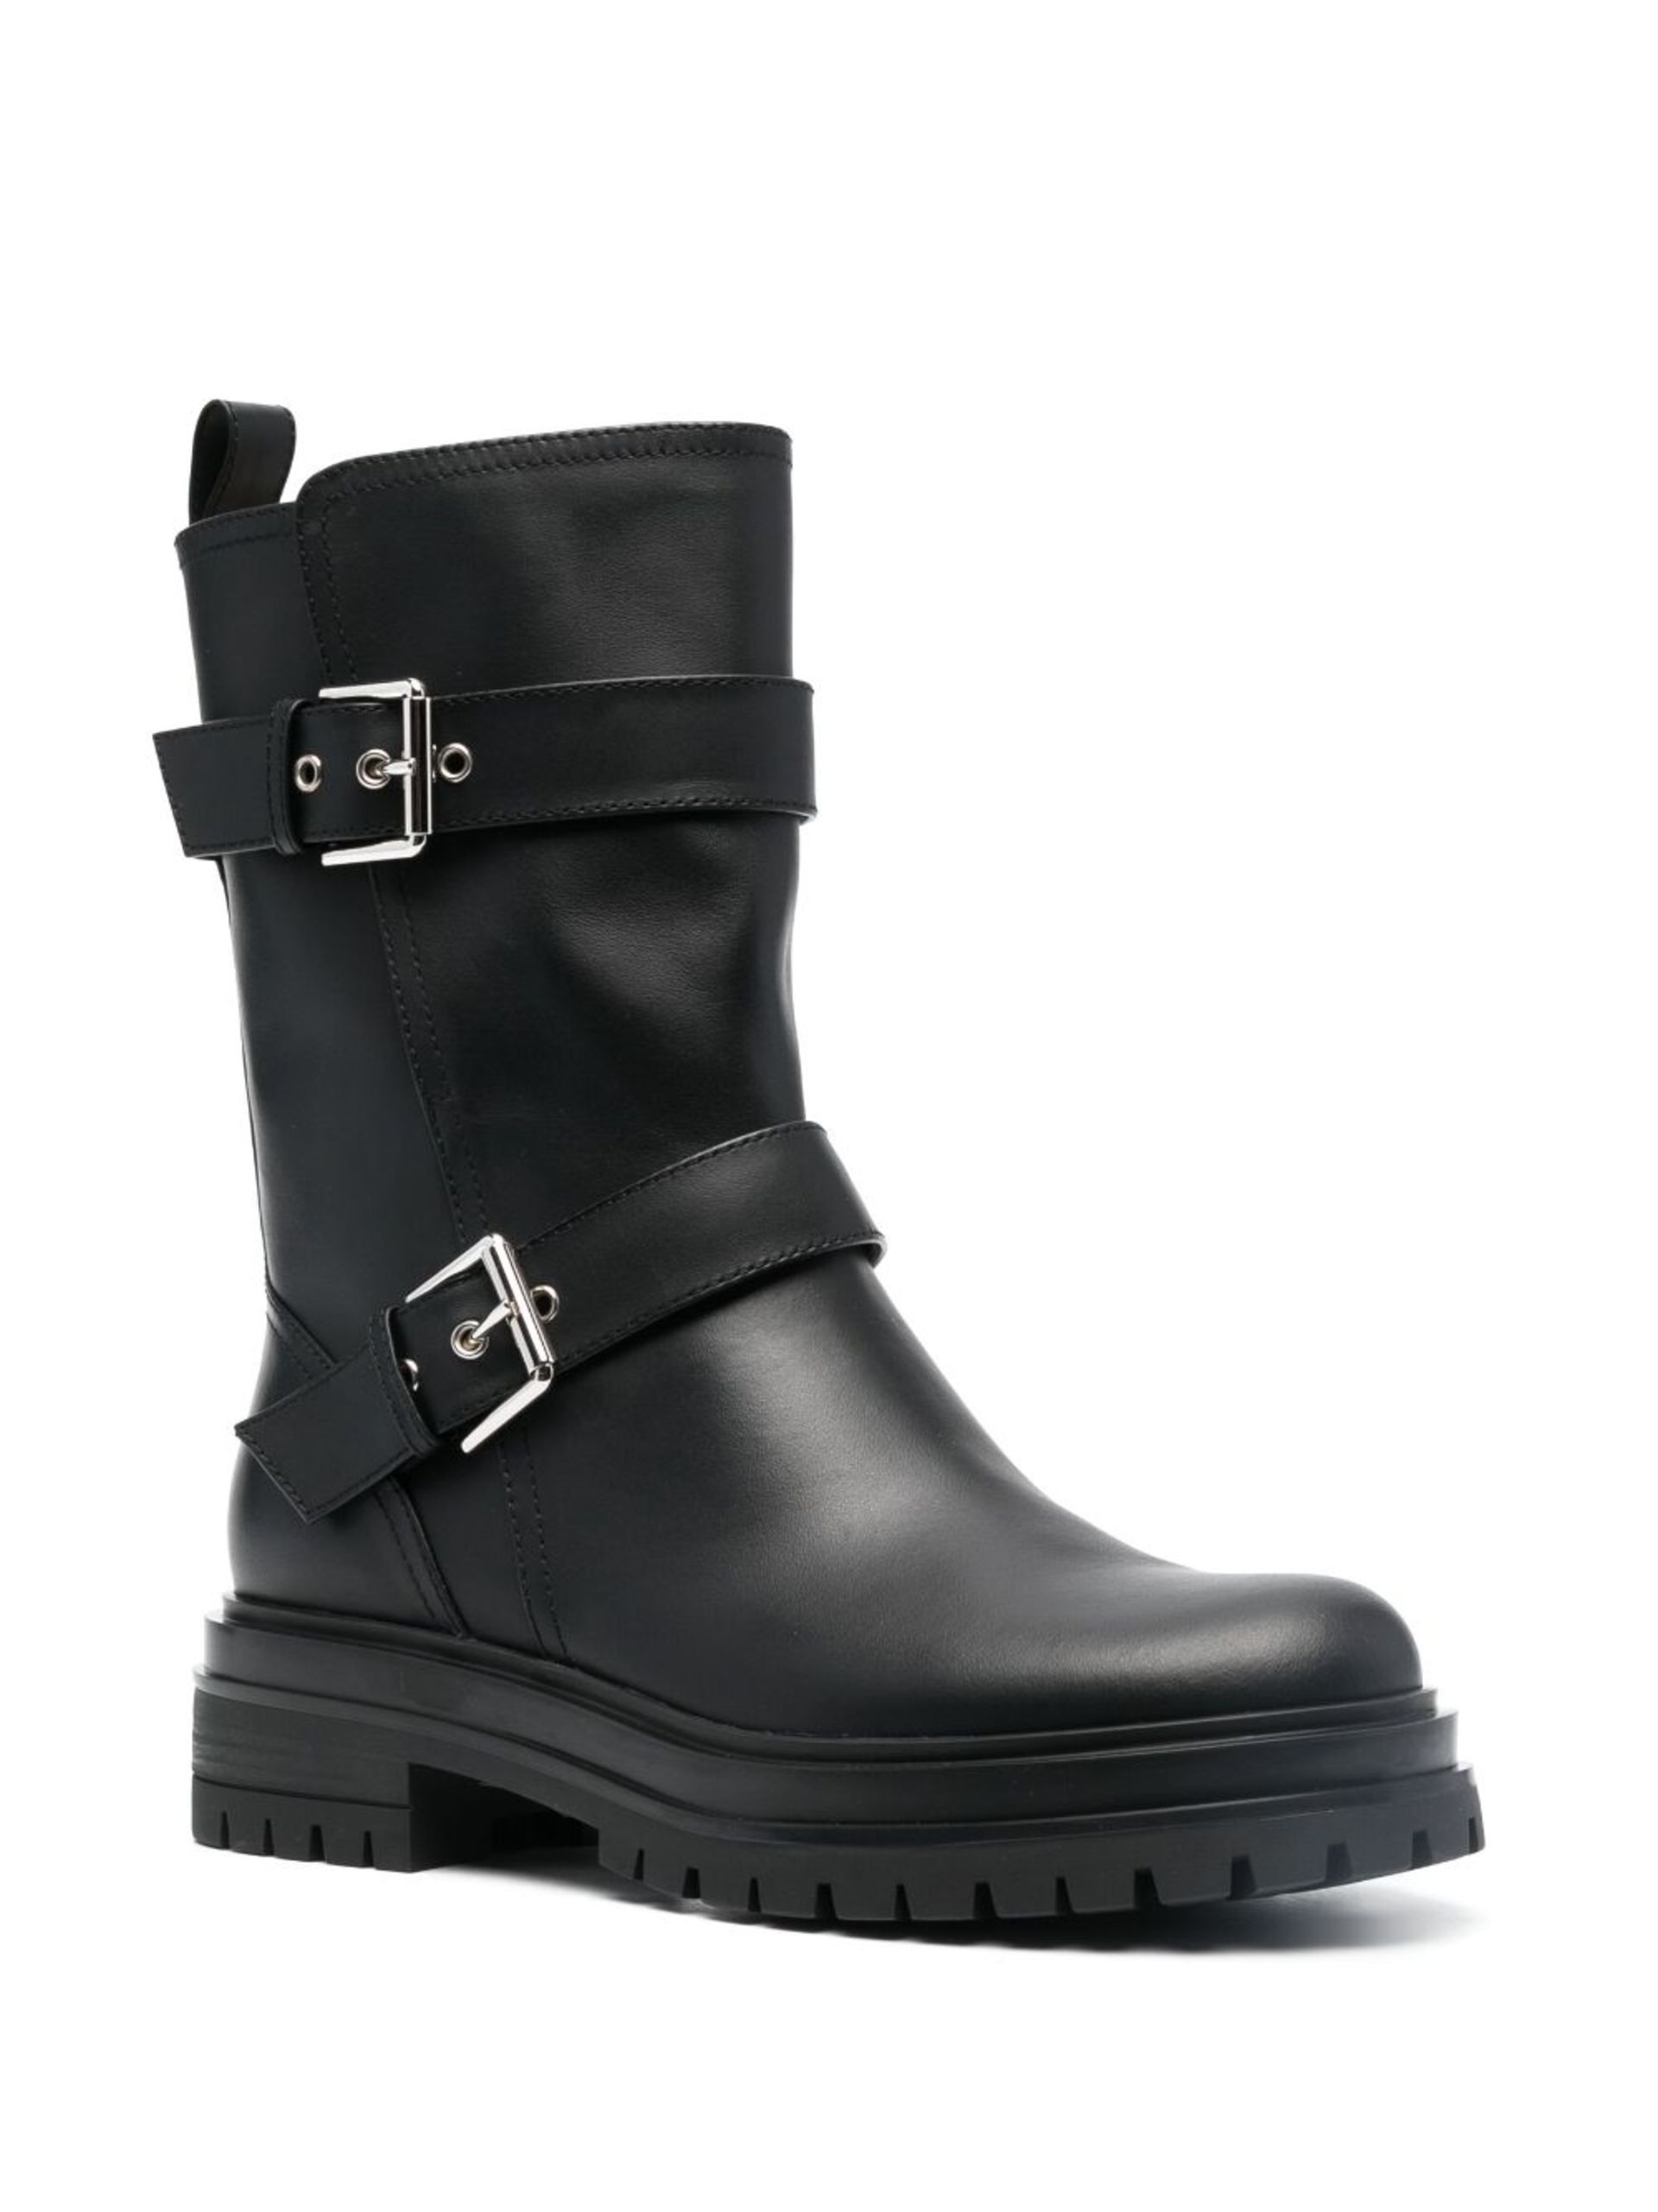 Black Amphibian Buckled Ankle Boots - 2